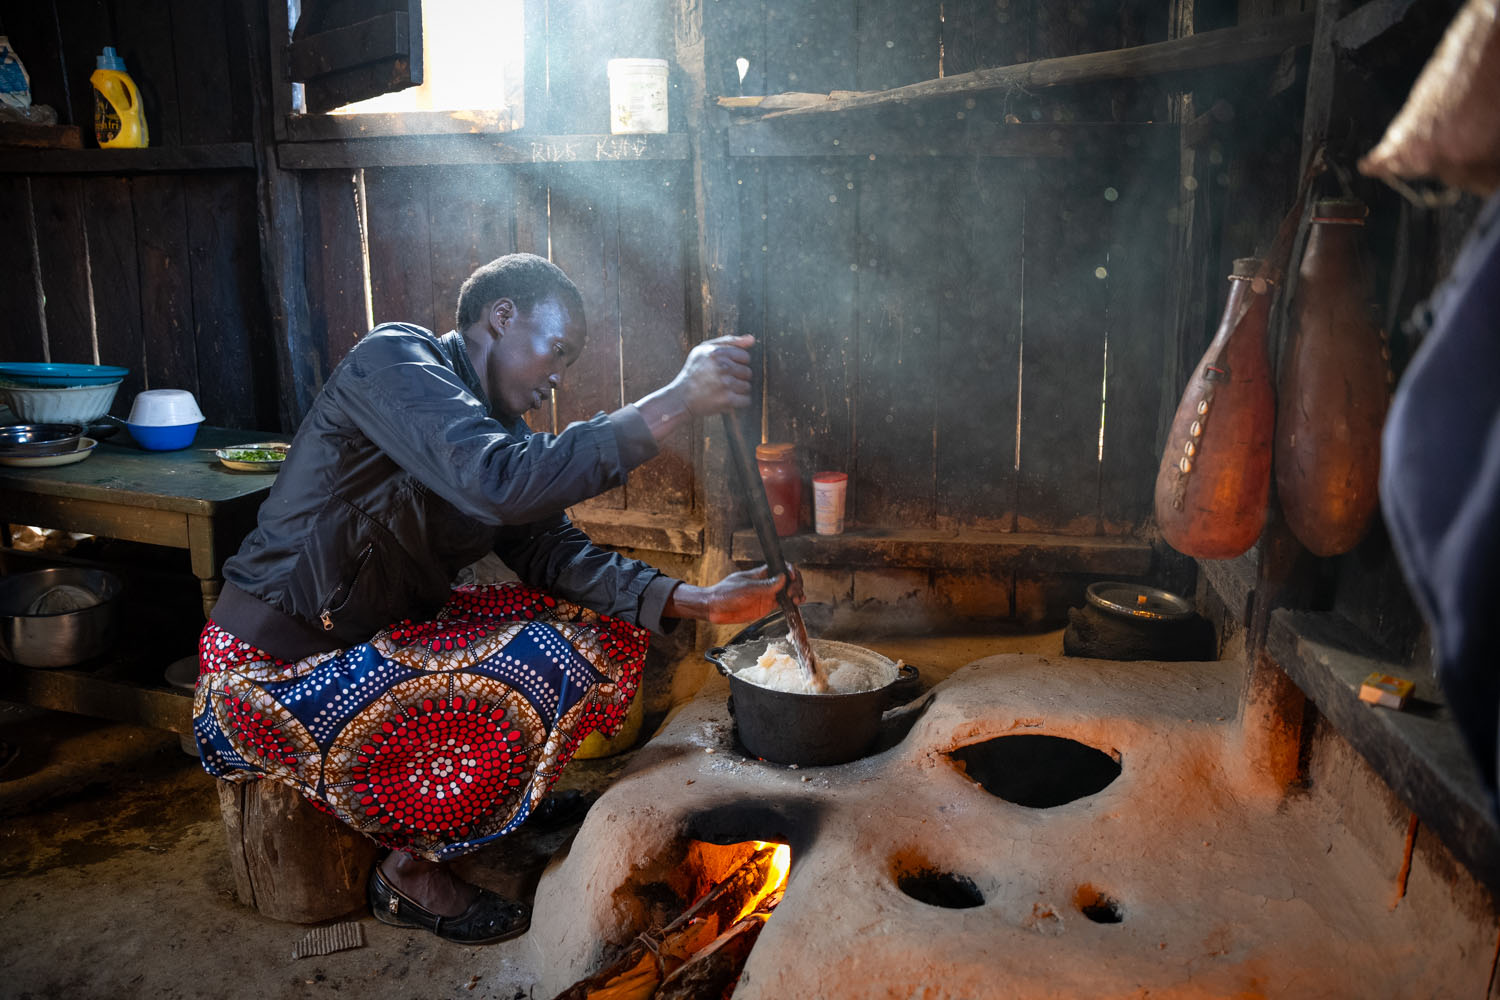 A Kenyan woman sits in front of her clay stove, stirring food in a pot over an open flame. 